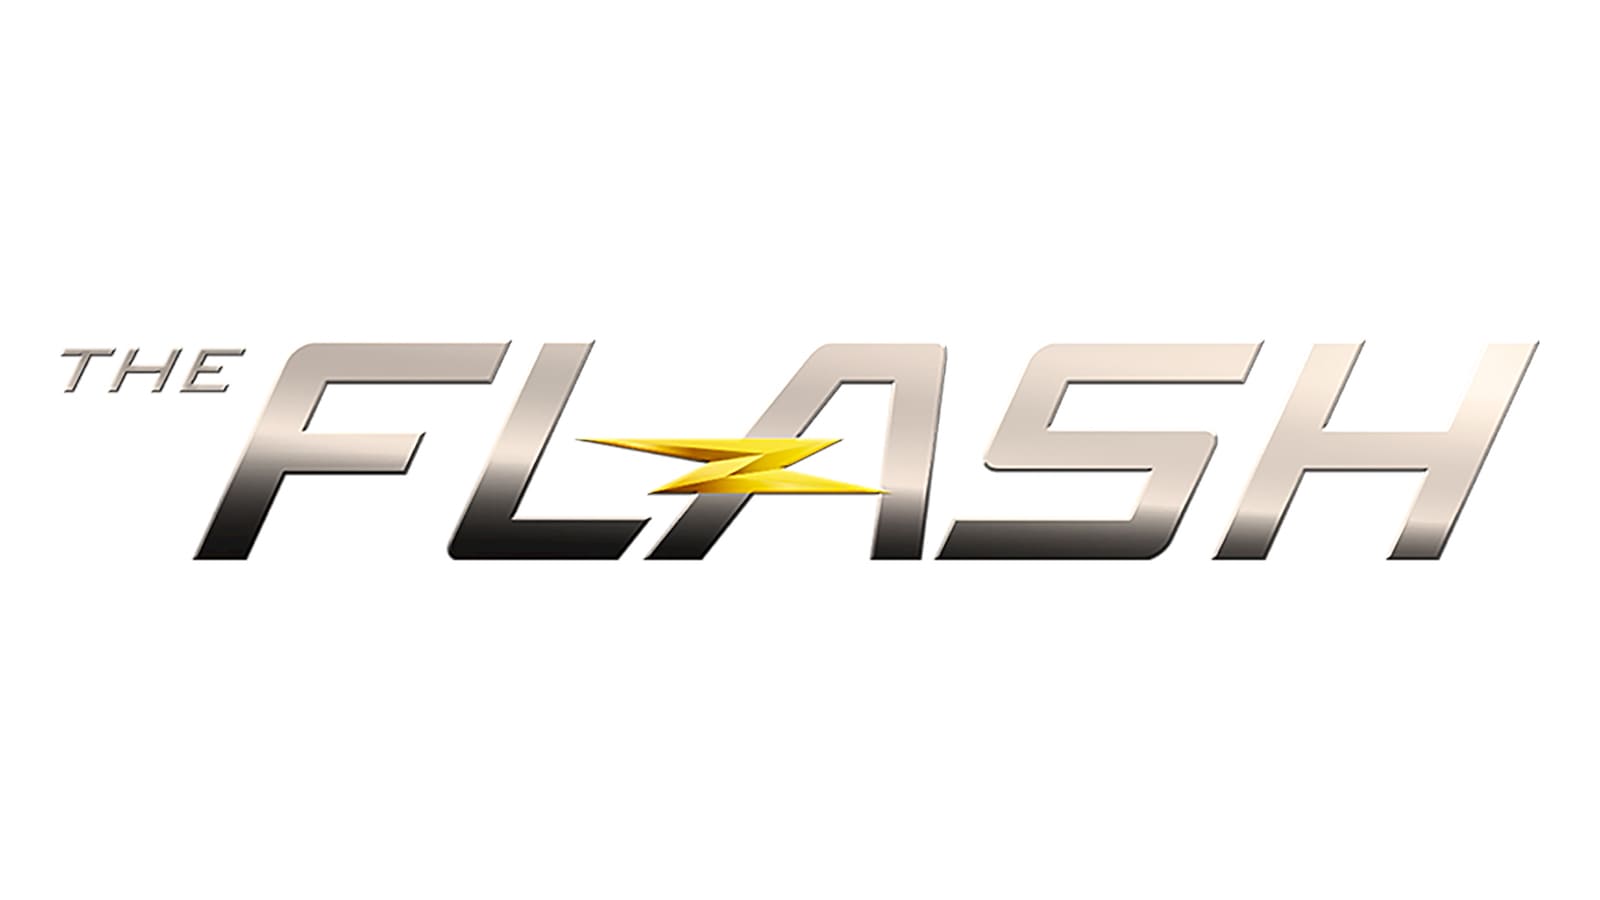 THE FLASH LOGO HD - 2022 MOVIE - PNG by Andrewvm on DeviantArt